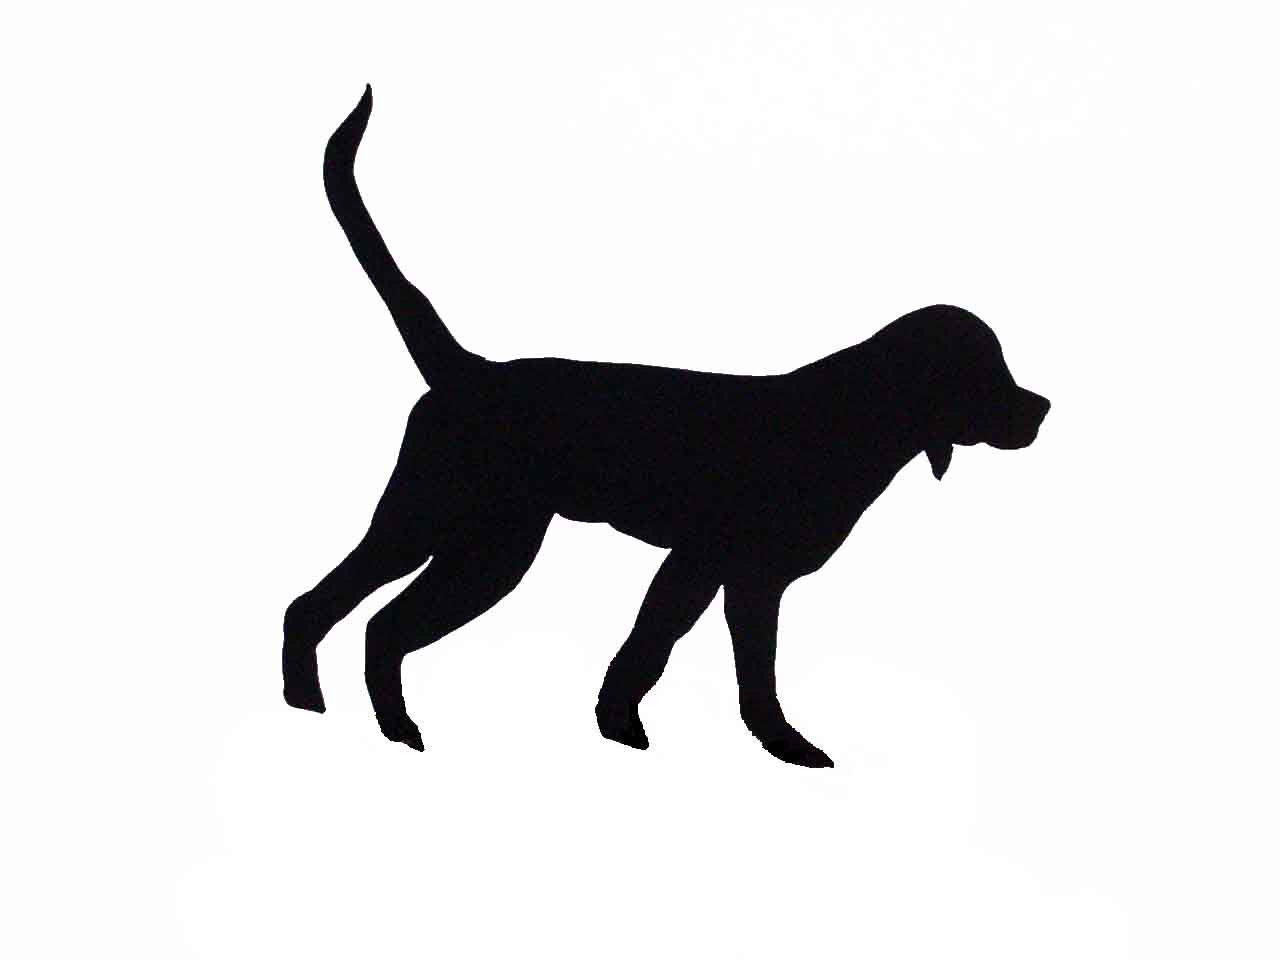 Sitting Dog Silhouette Clipart   Cliparthut   Free Clipart